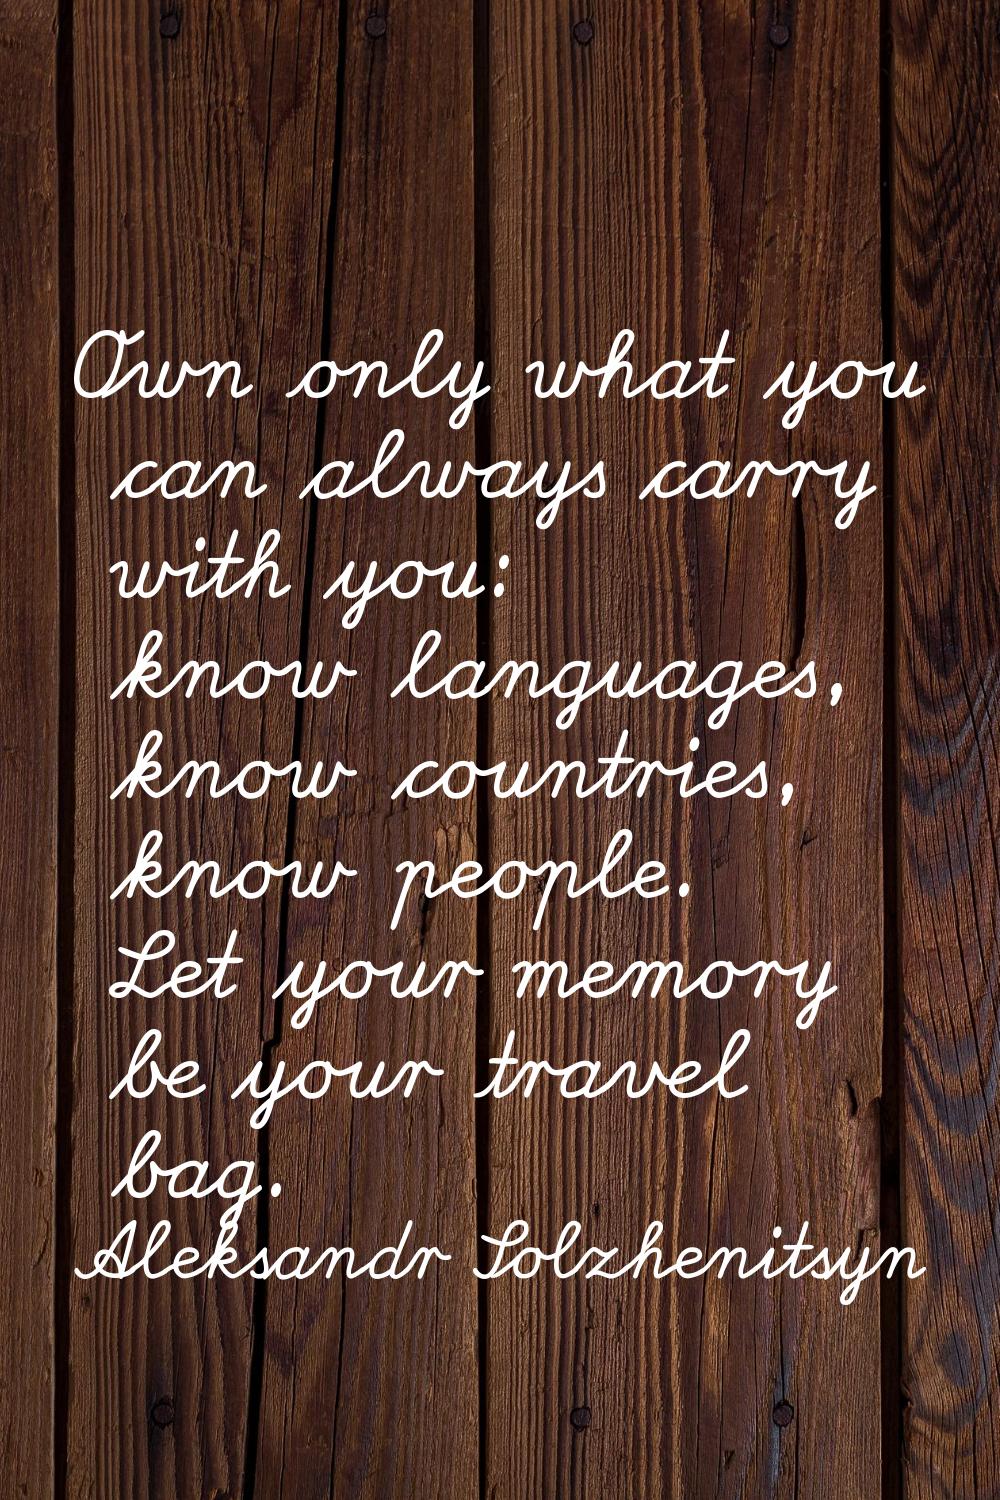 Own only what you can always carry with you: know languages, know countries, know people. Let your 